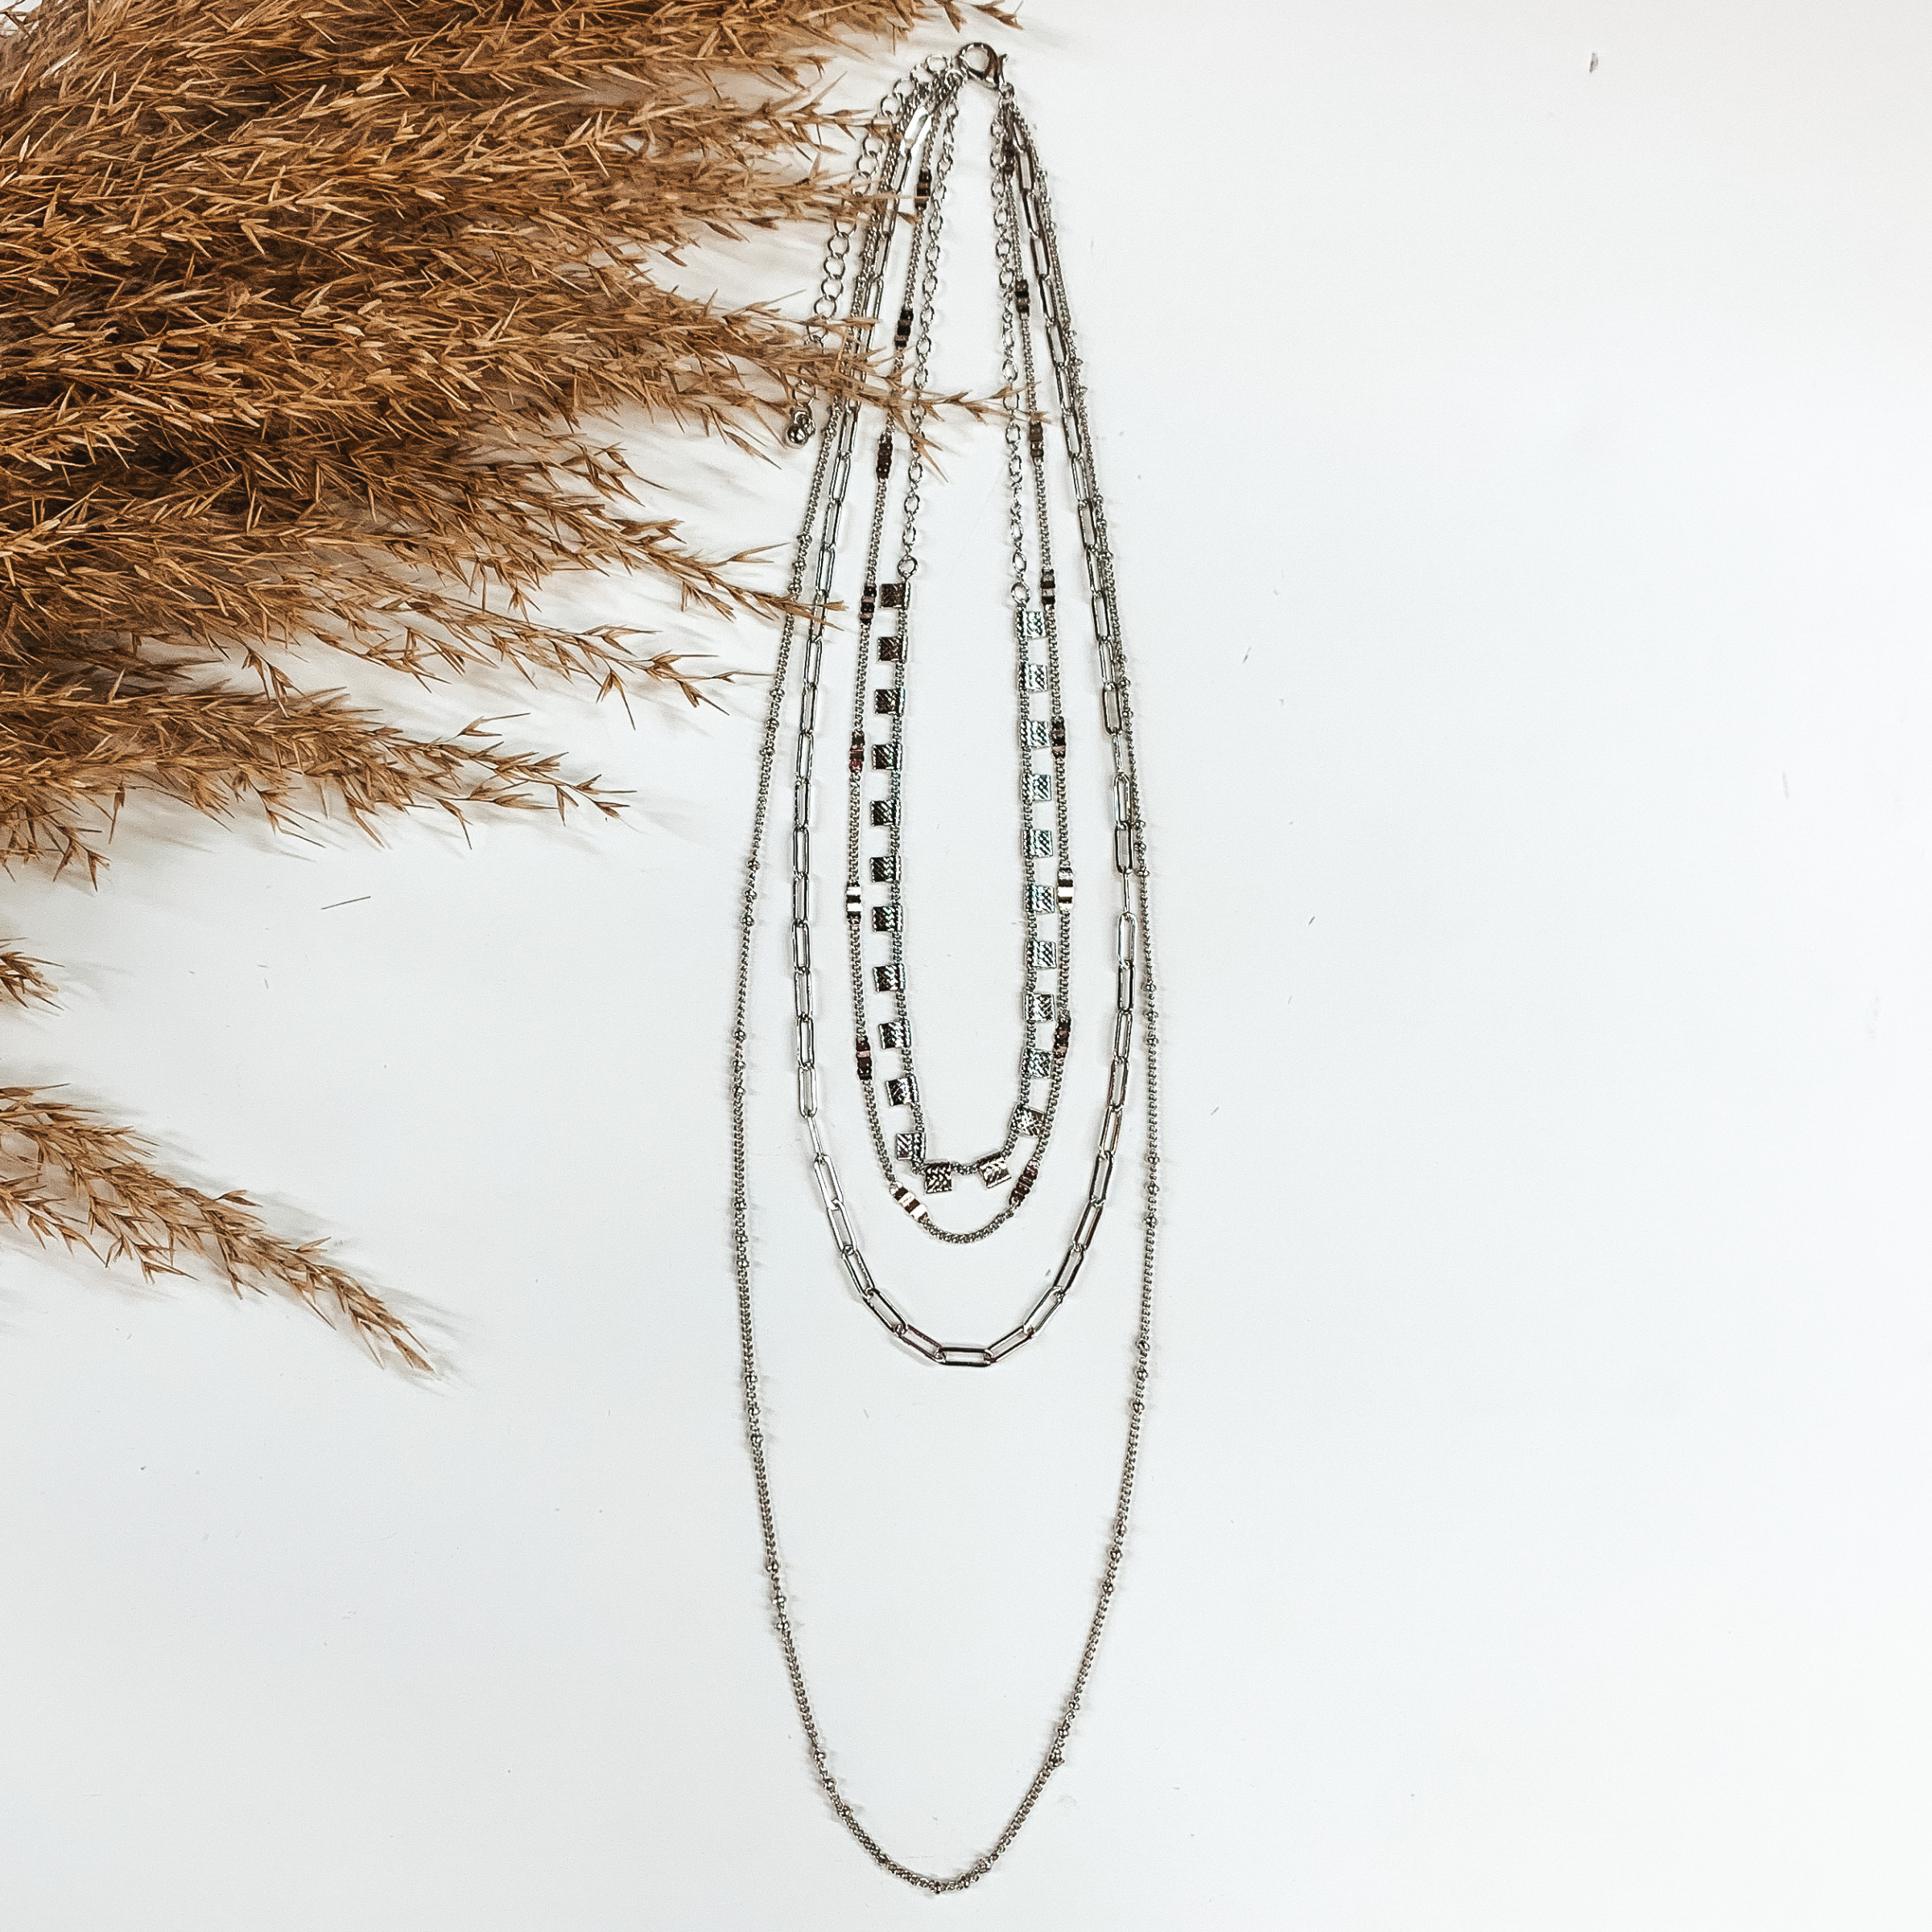 String Me Along Necklace in Silver - Giddy Up Glamour Boutique